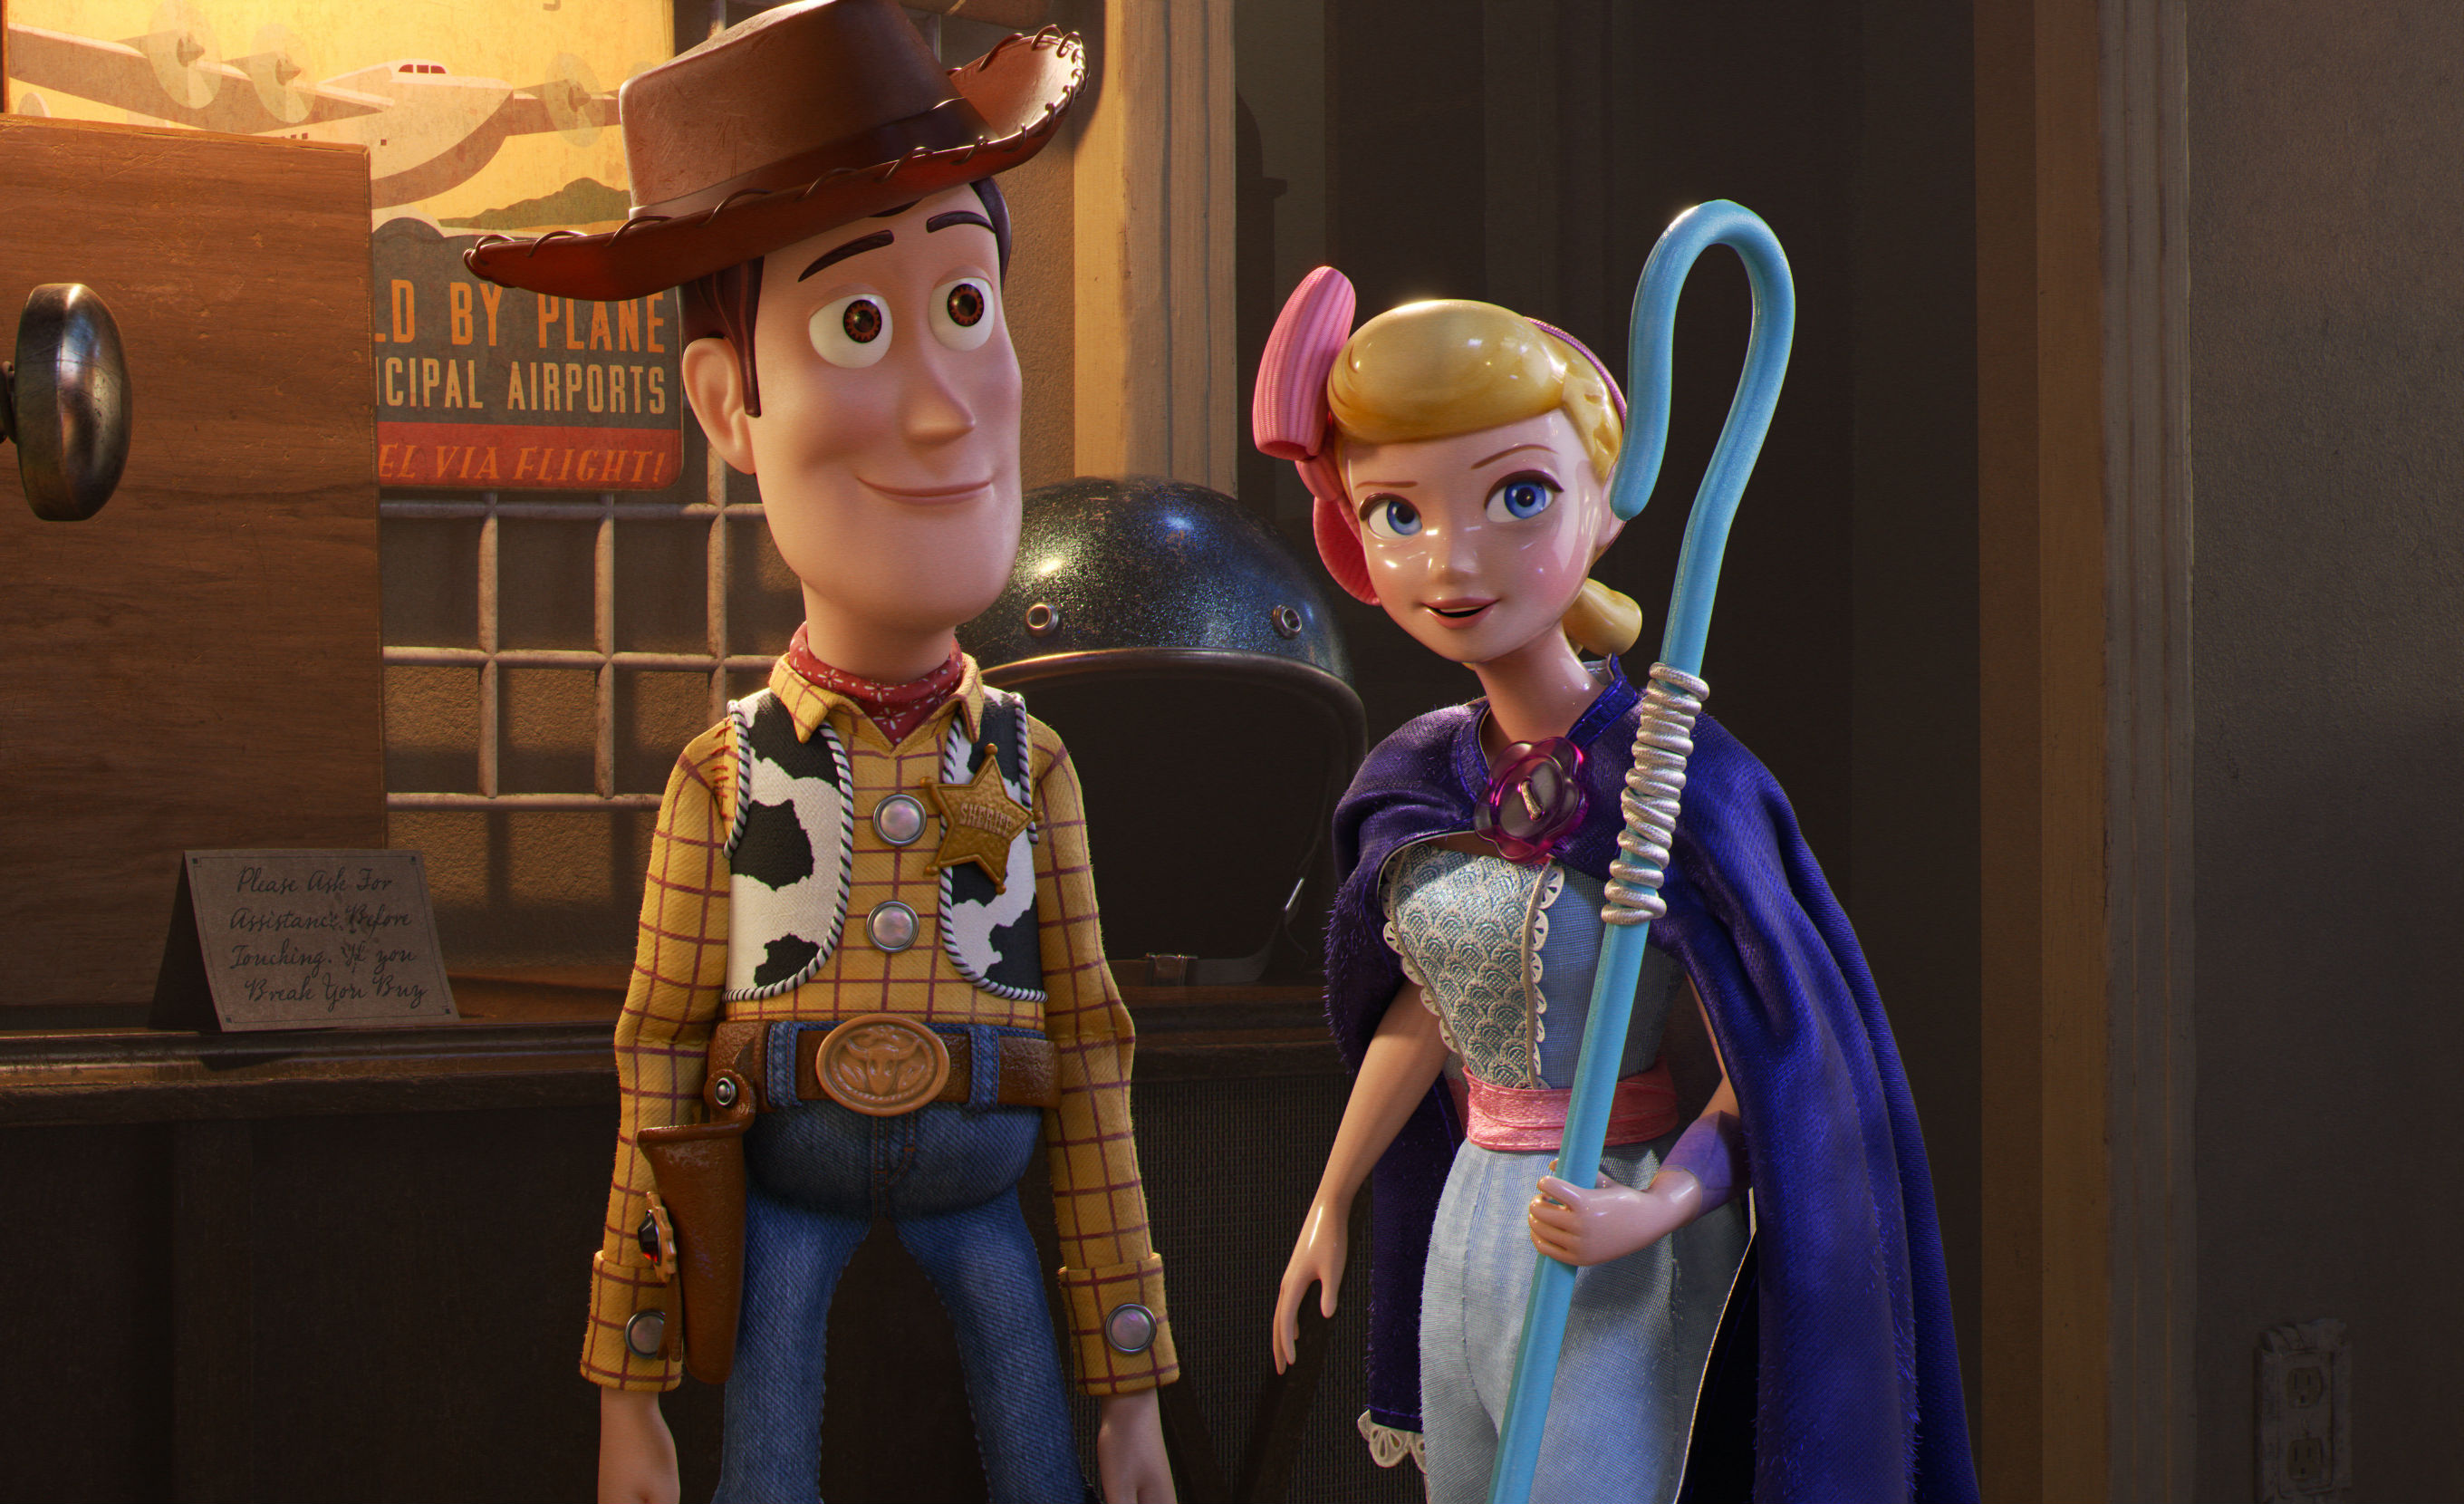 Toy Story 4 Takes In $12 Million In Thursday Night Previews